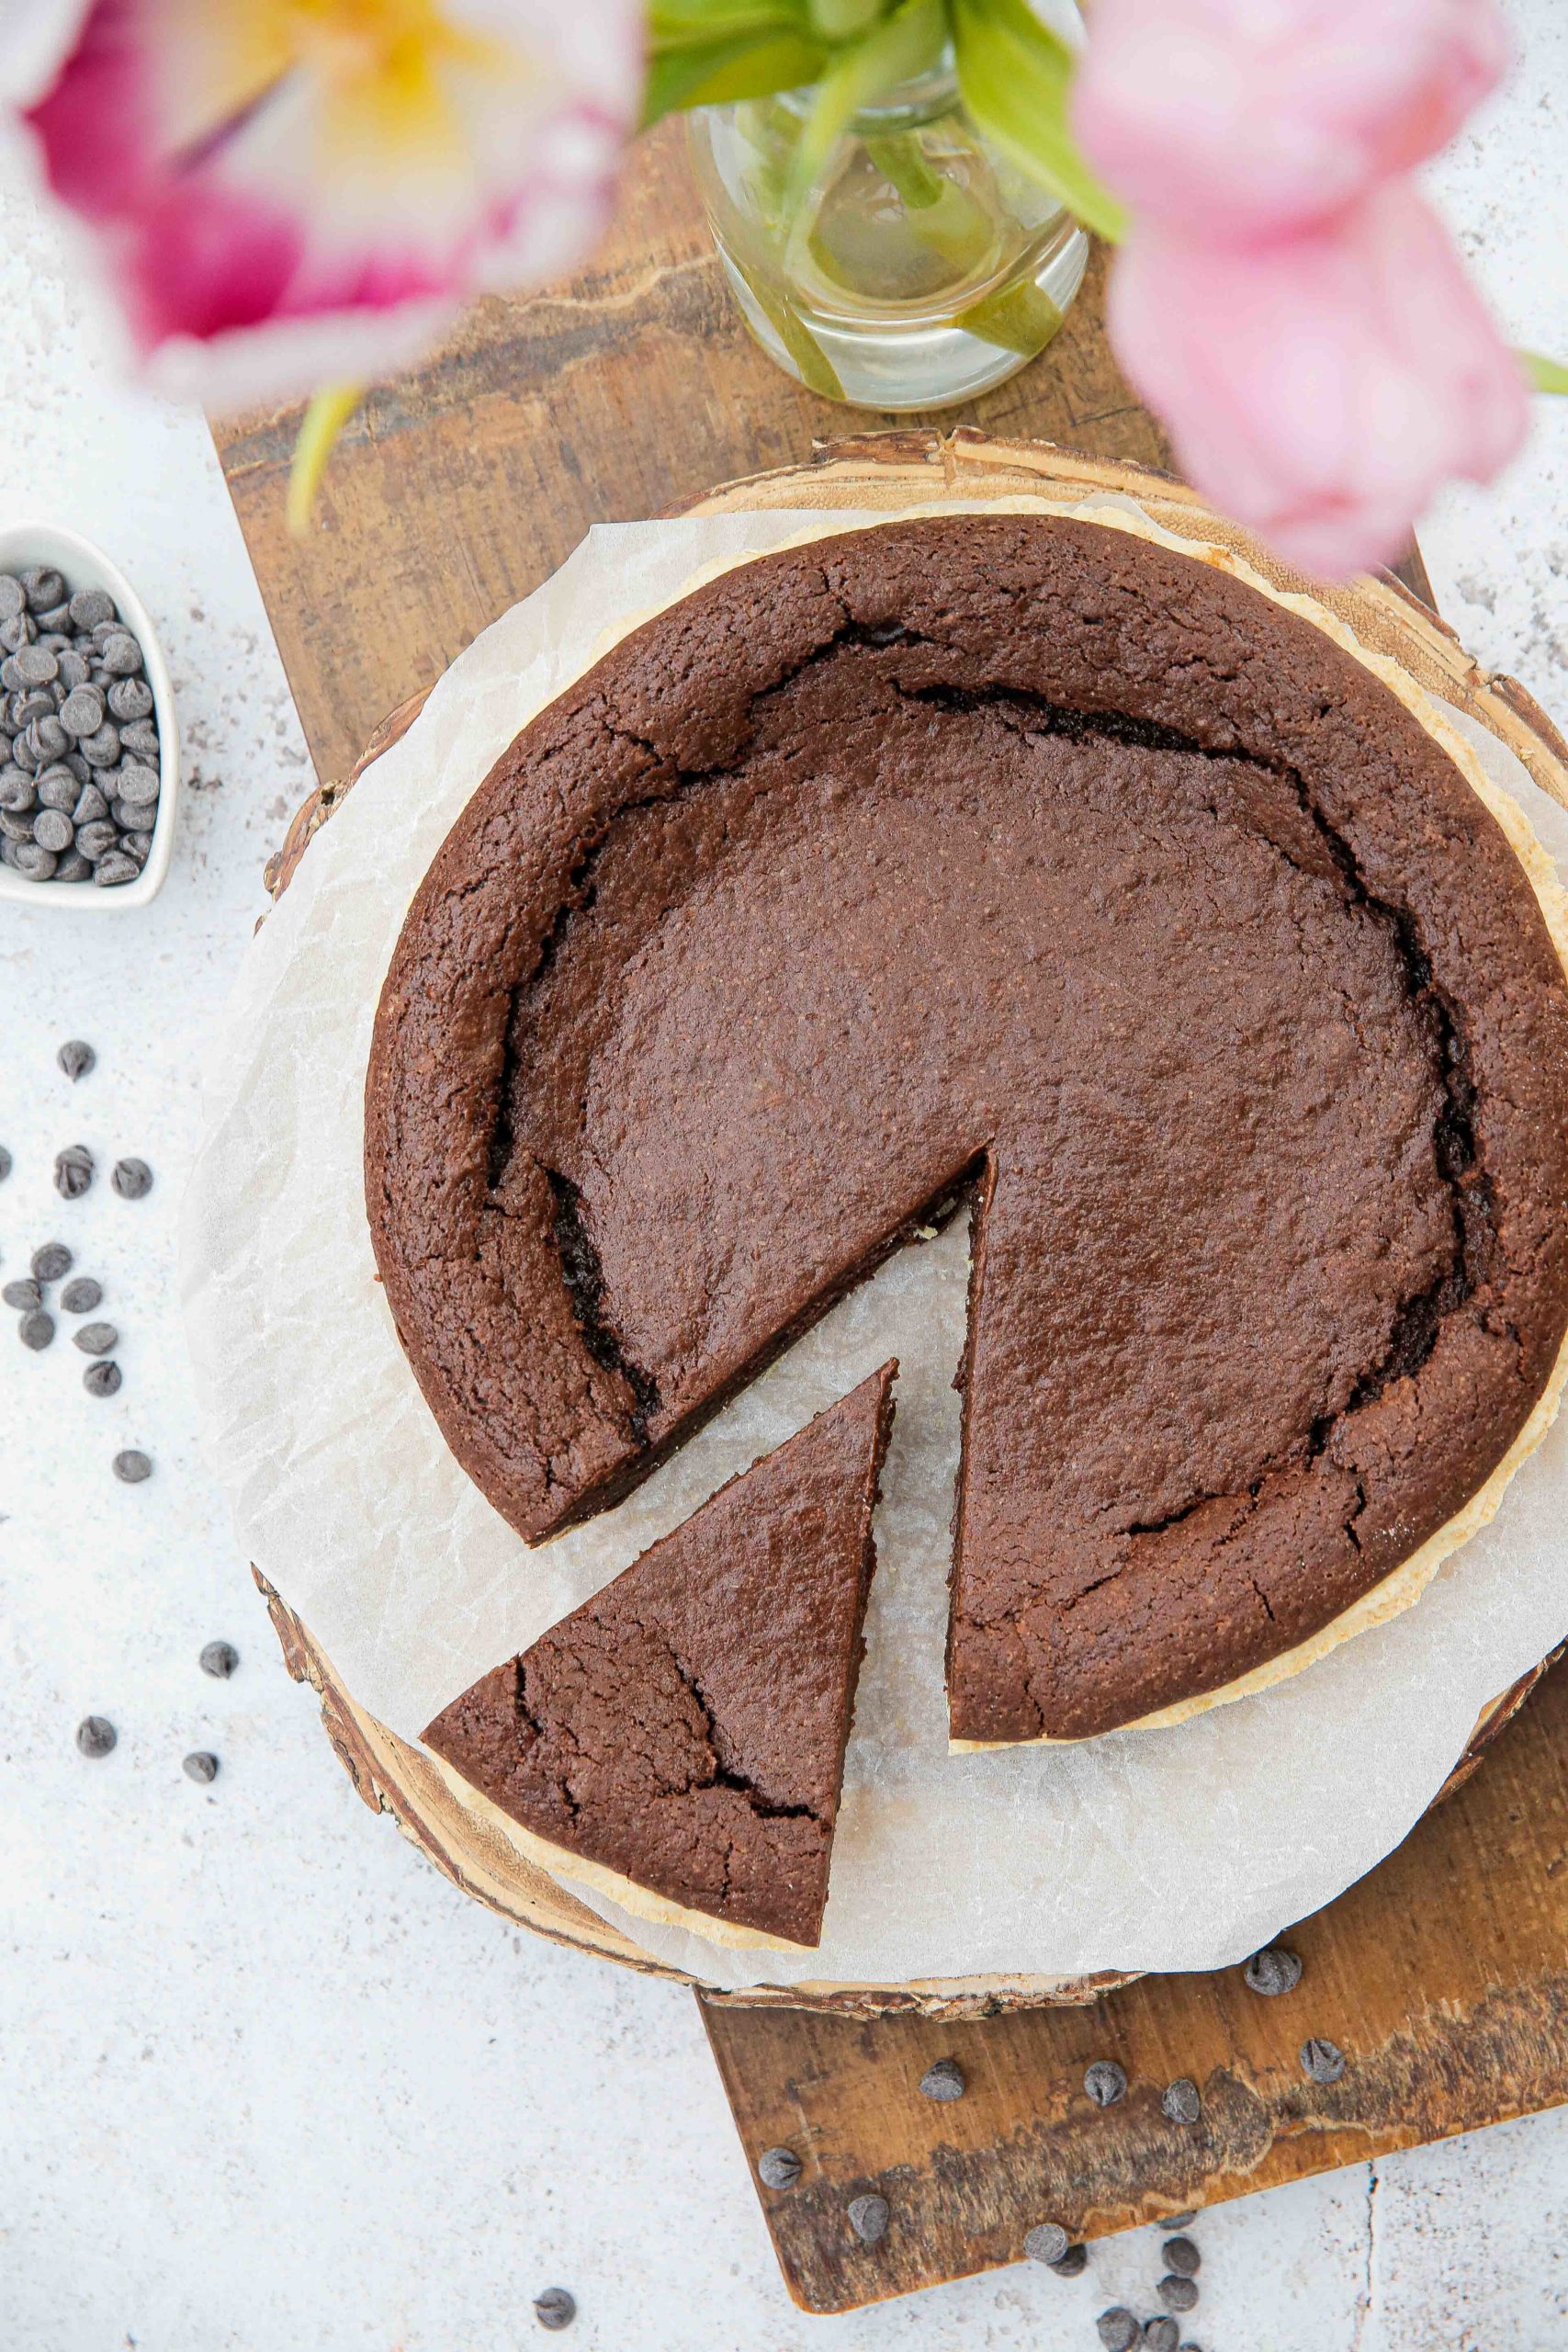 This vegan fudgy brownie pie is a really easy but impressive looking dessert and great for any occasion! The rich and chocolatey brownie filling is baked in a flaky buttery pie crust and is an absolute chocolate lovers dream! Recipe on thecookandhim.com | #vegan #pie #vegandesserts #veganbrownie #browniepie